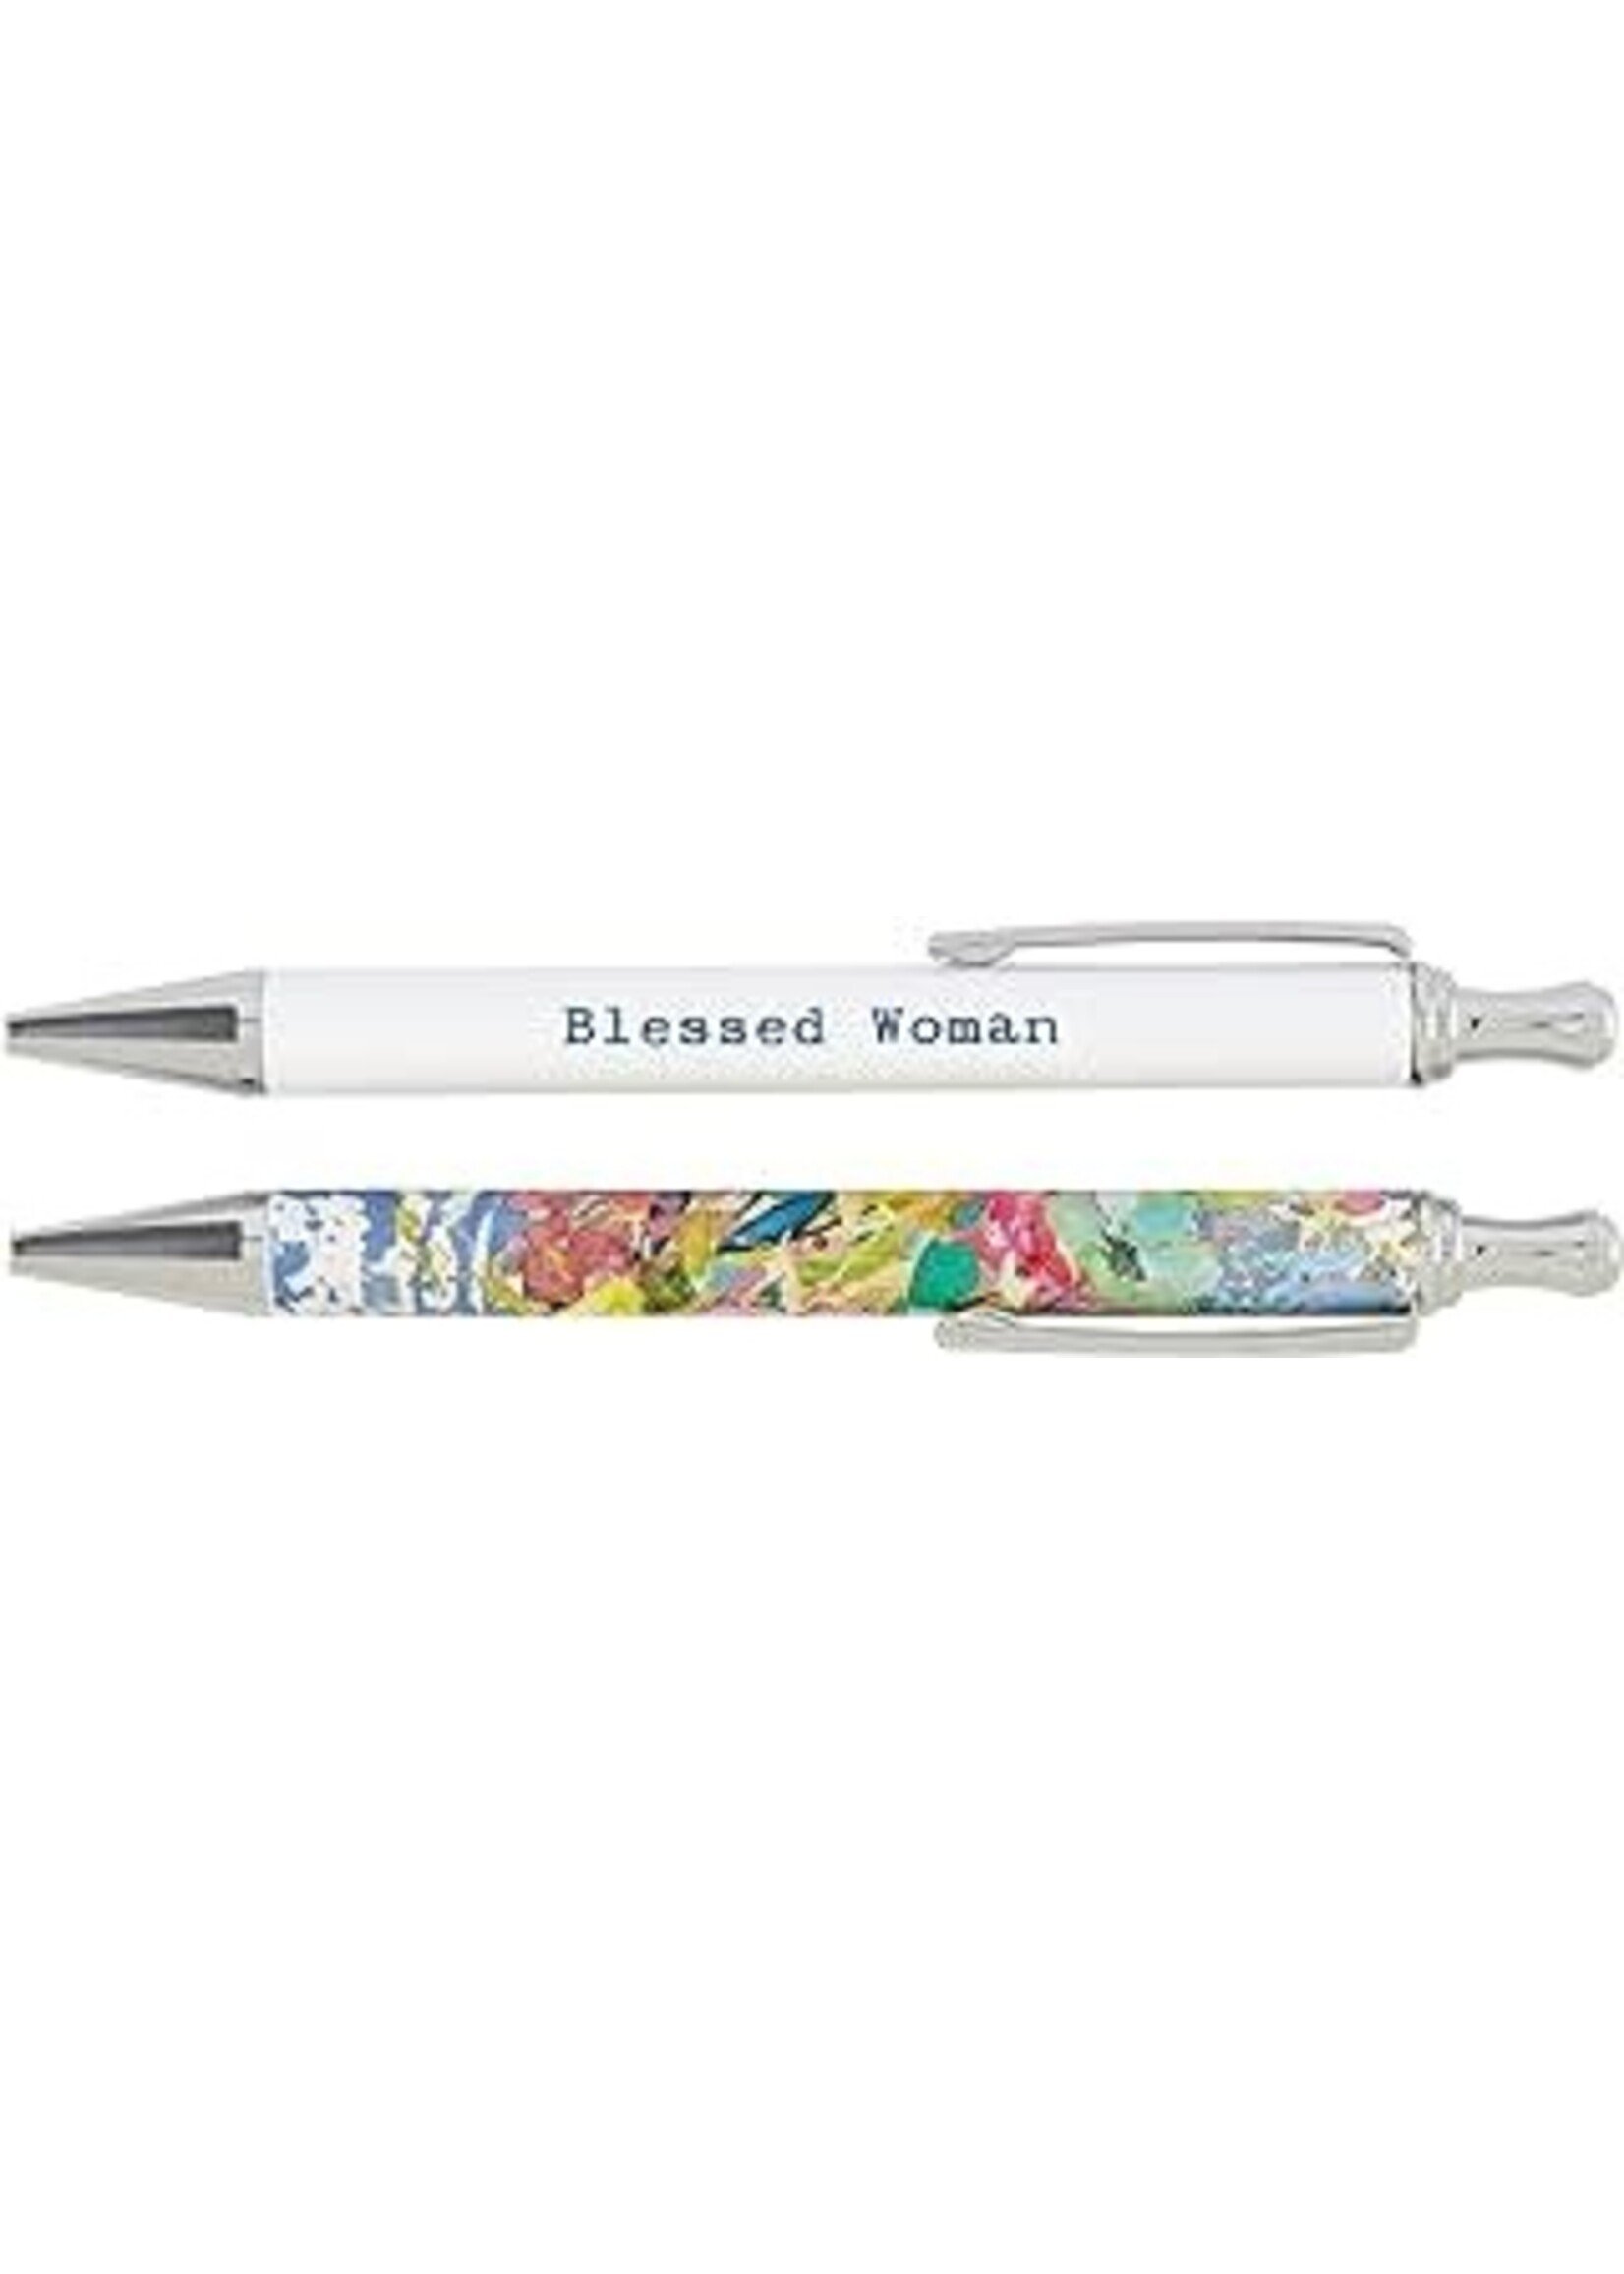 Pen Set-Blessed Woman (Set Of 2)